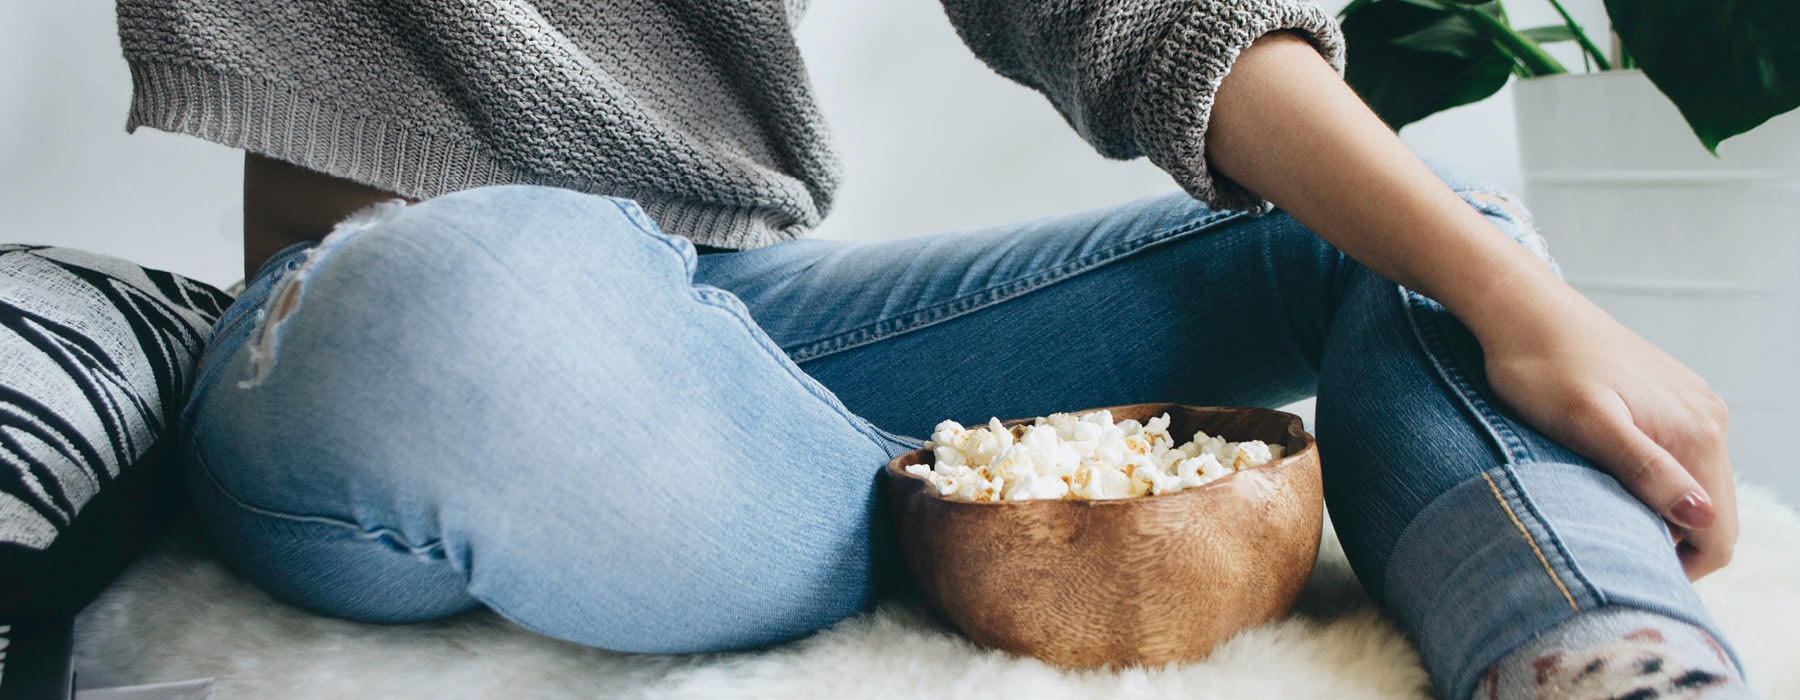 woman sits on rug with a bowl of popcorn